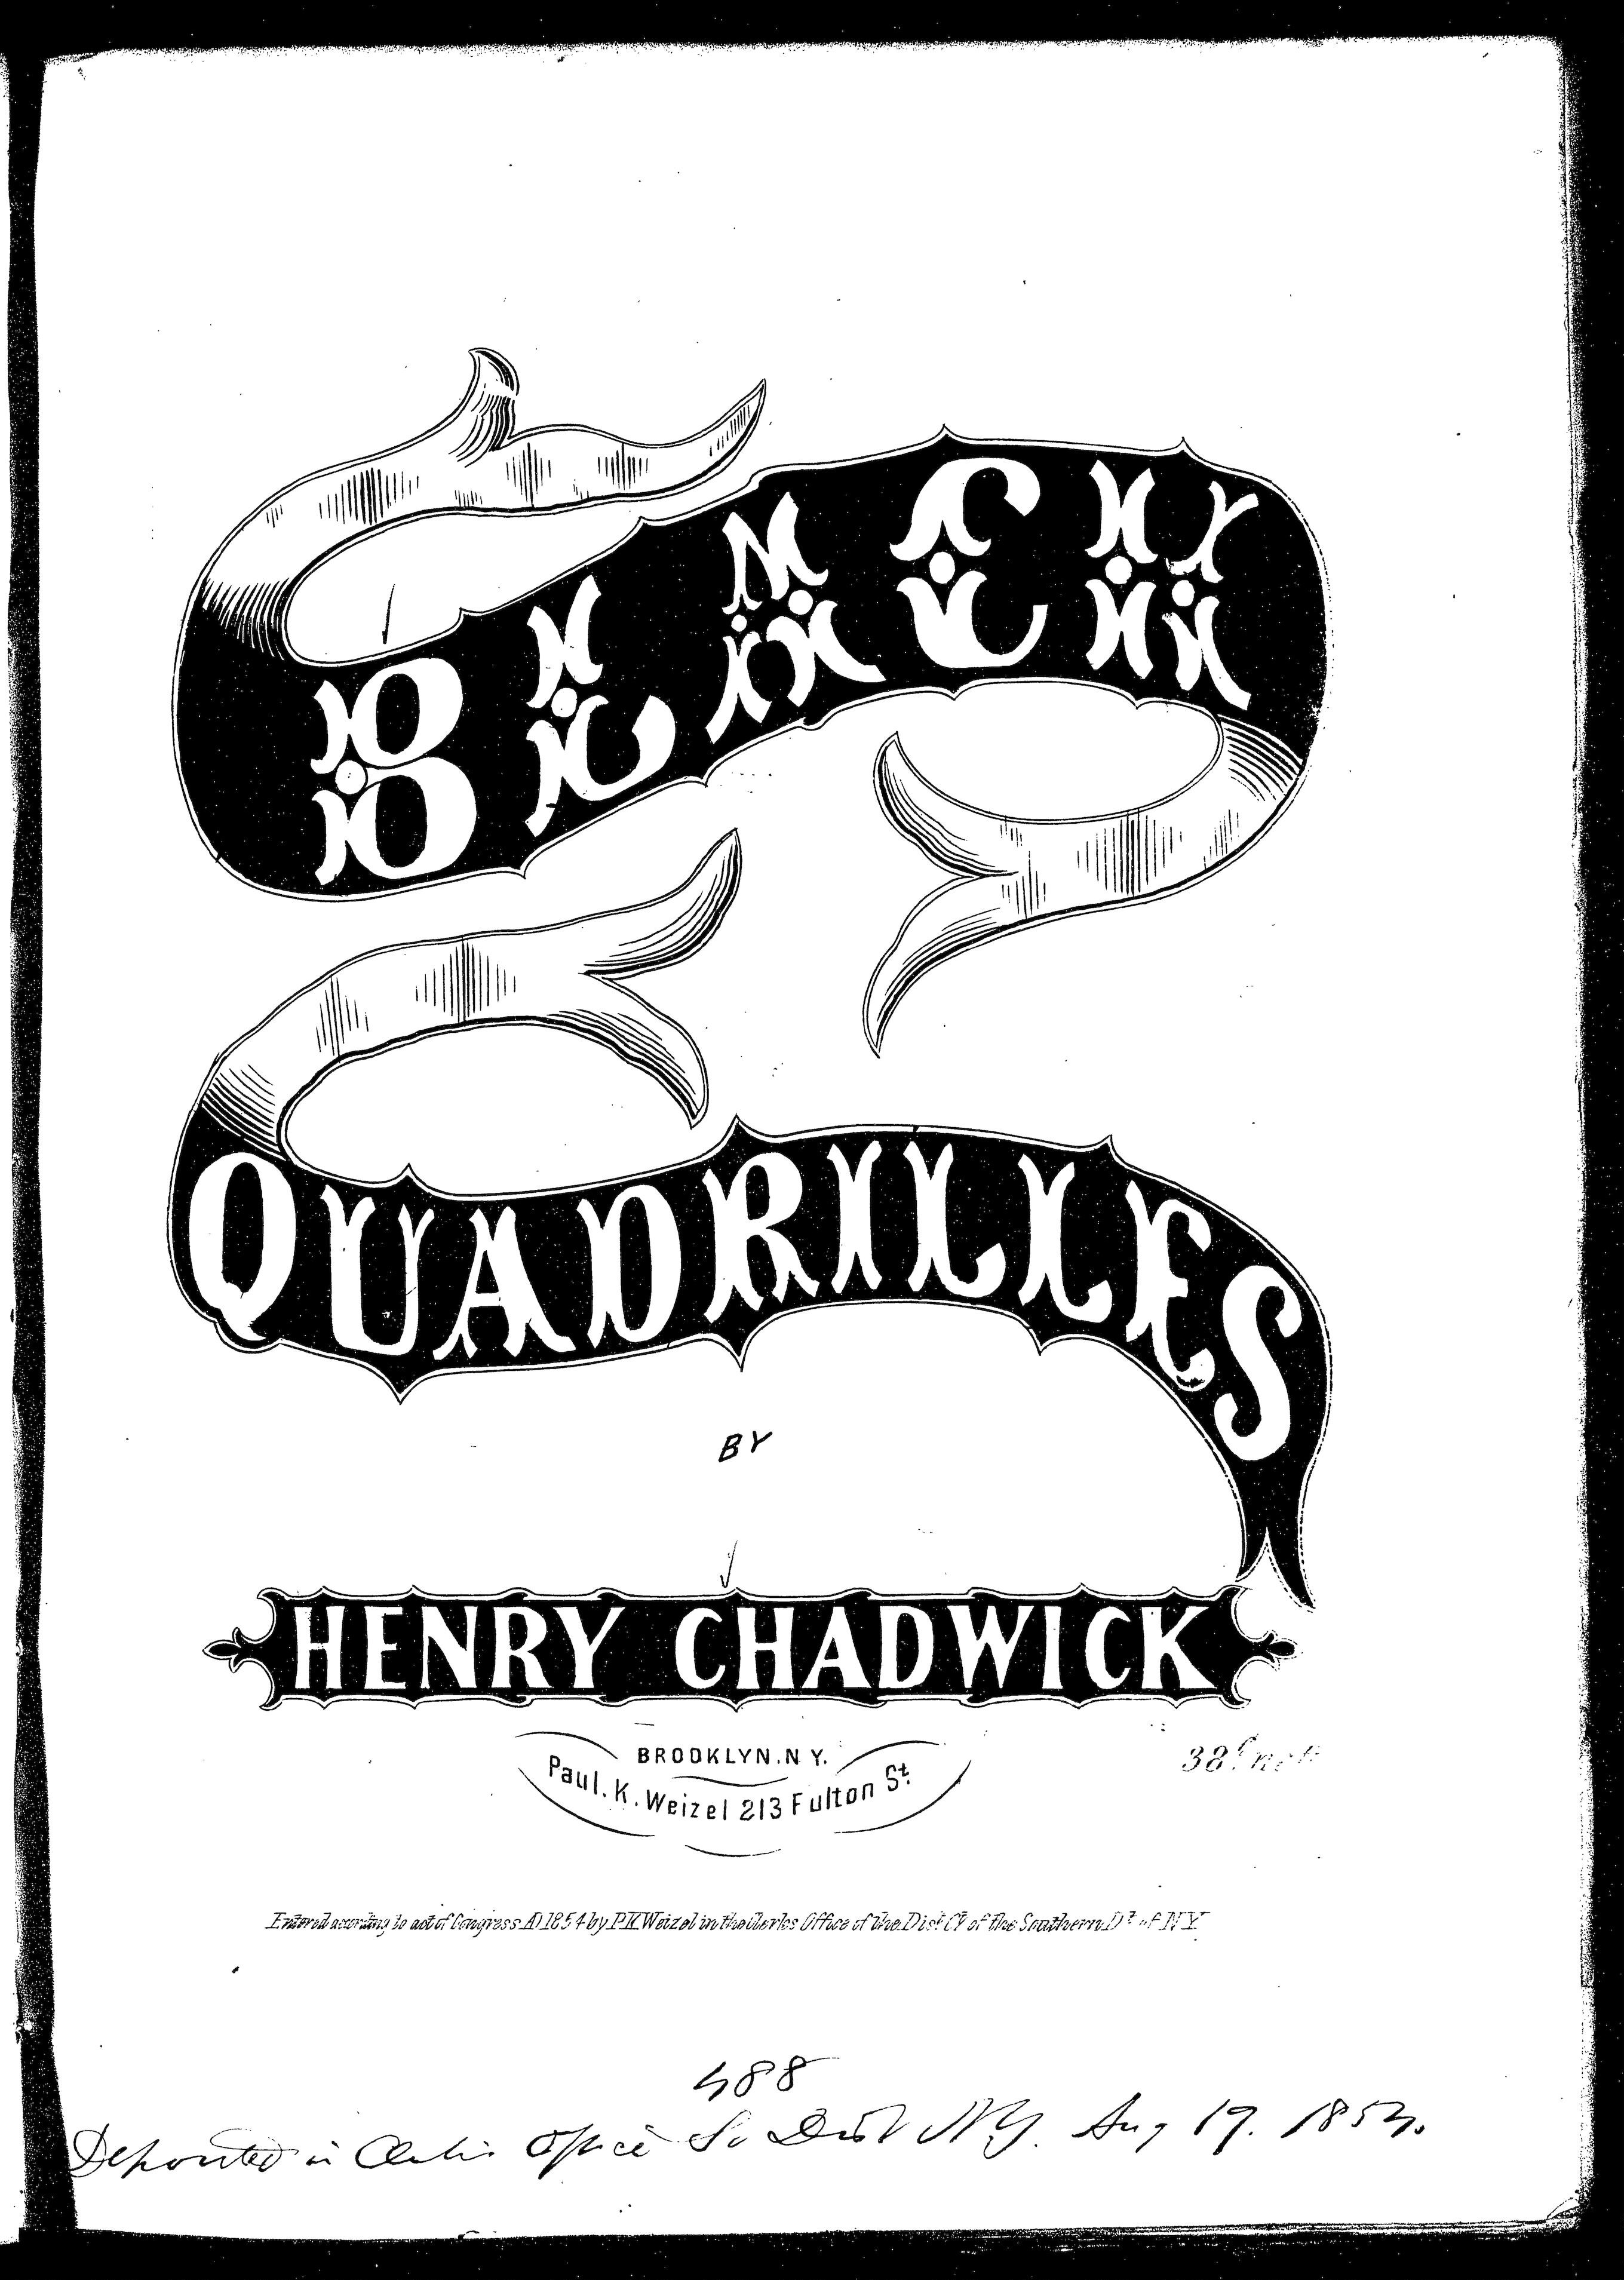 The black quadrilles | Library of Congress